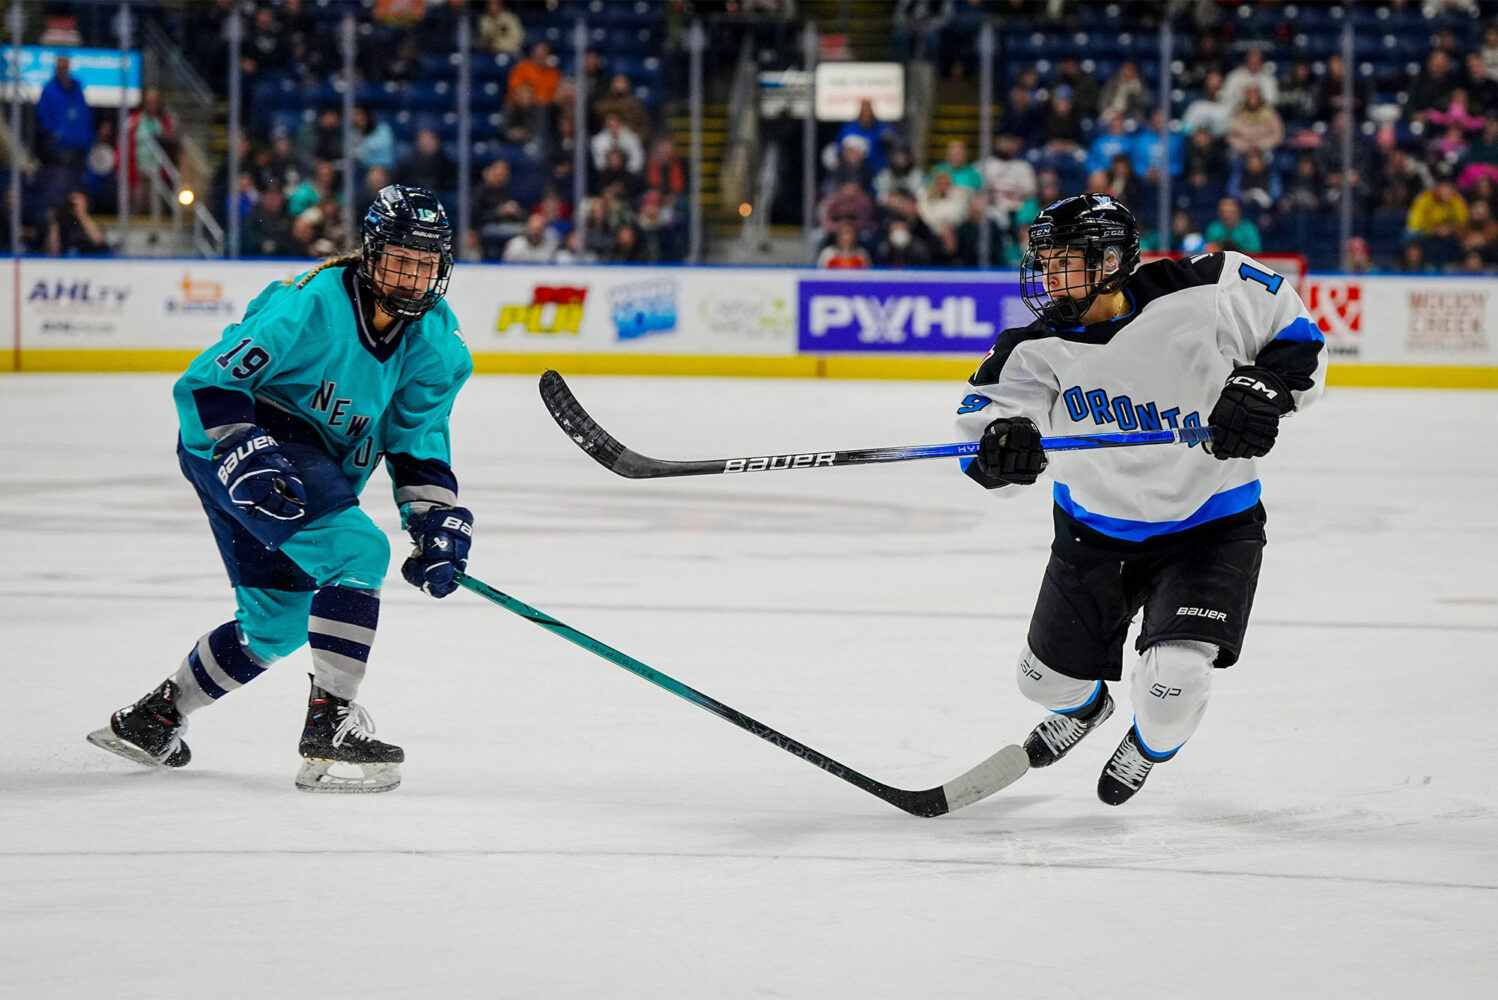 Photo: A Professional Women's hockey player wearing a Bridgeport CT jersey that is white with blue trim, taking a shot on goal at a recent game